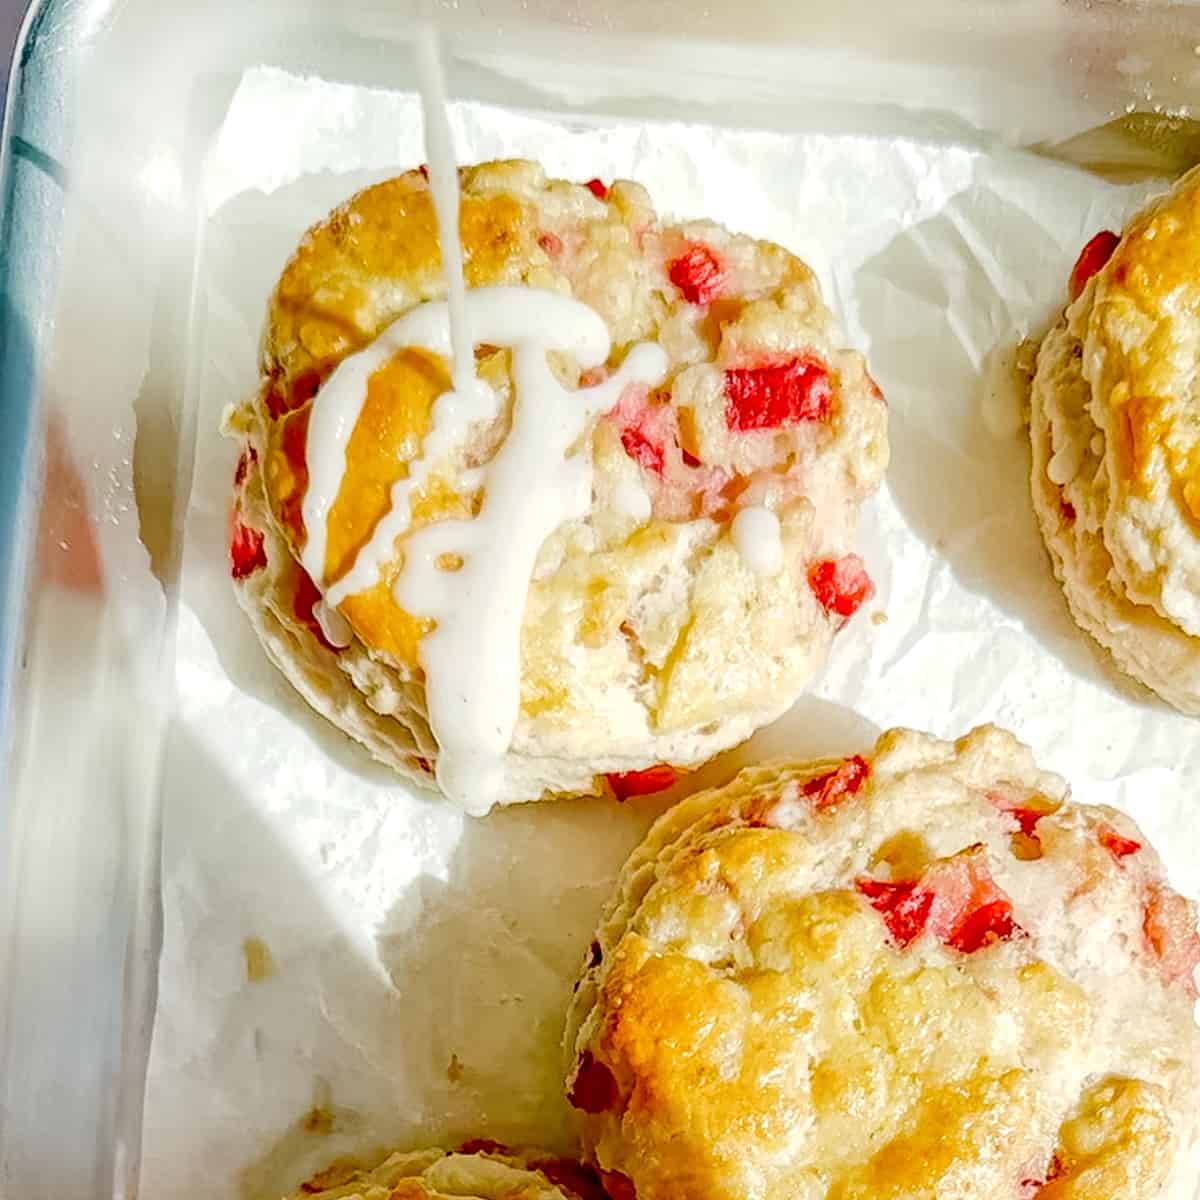 drizzling icing on a strawberry biscuit.